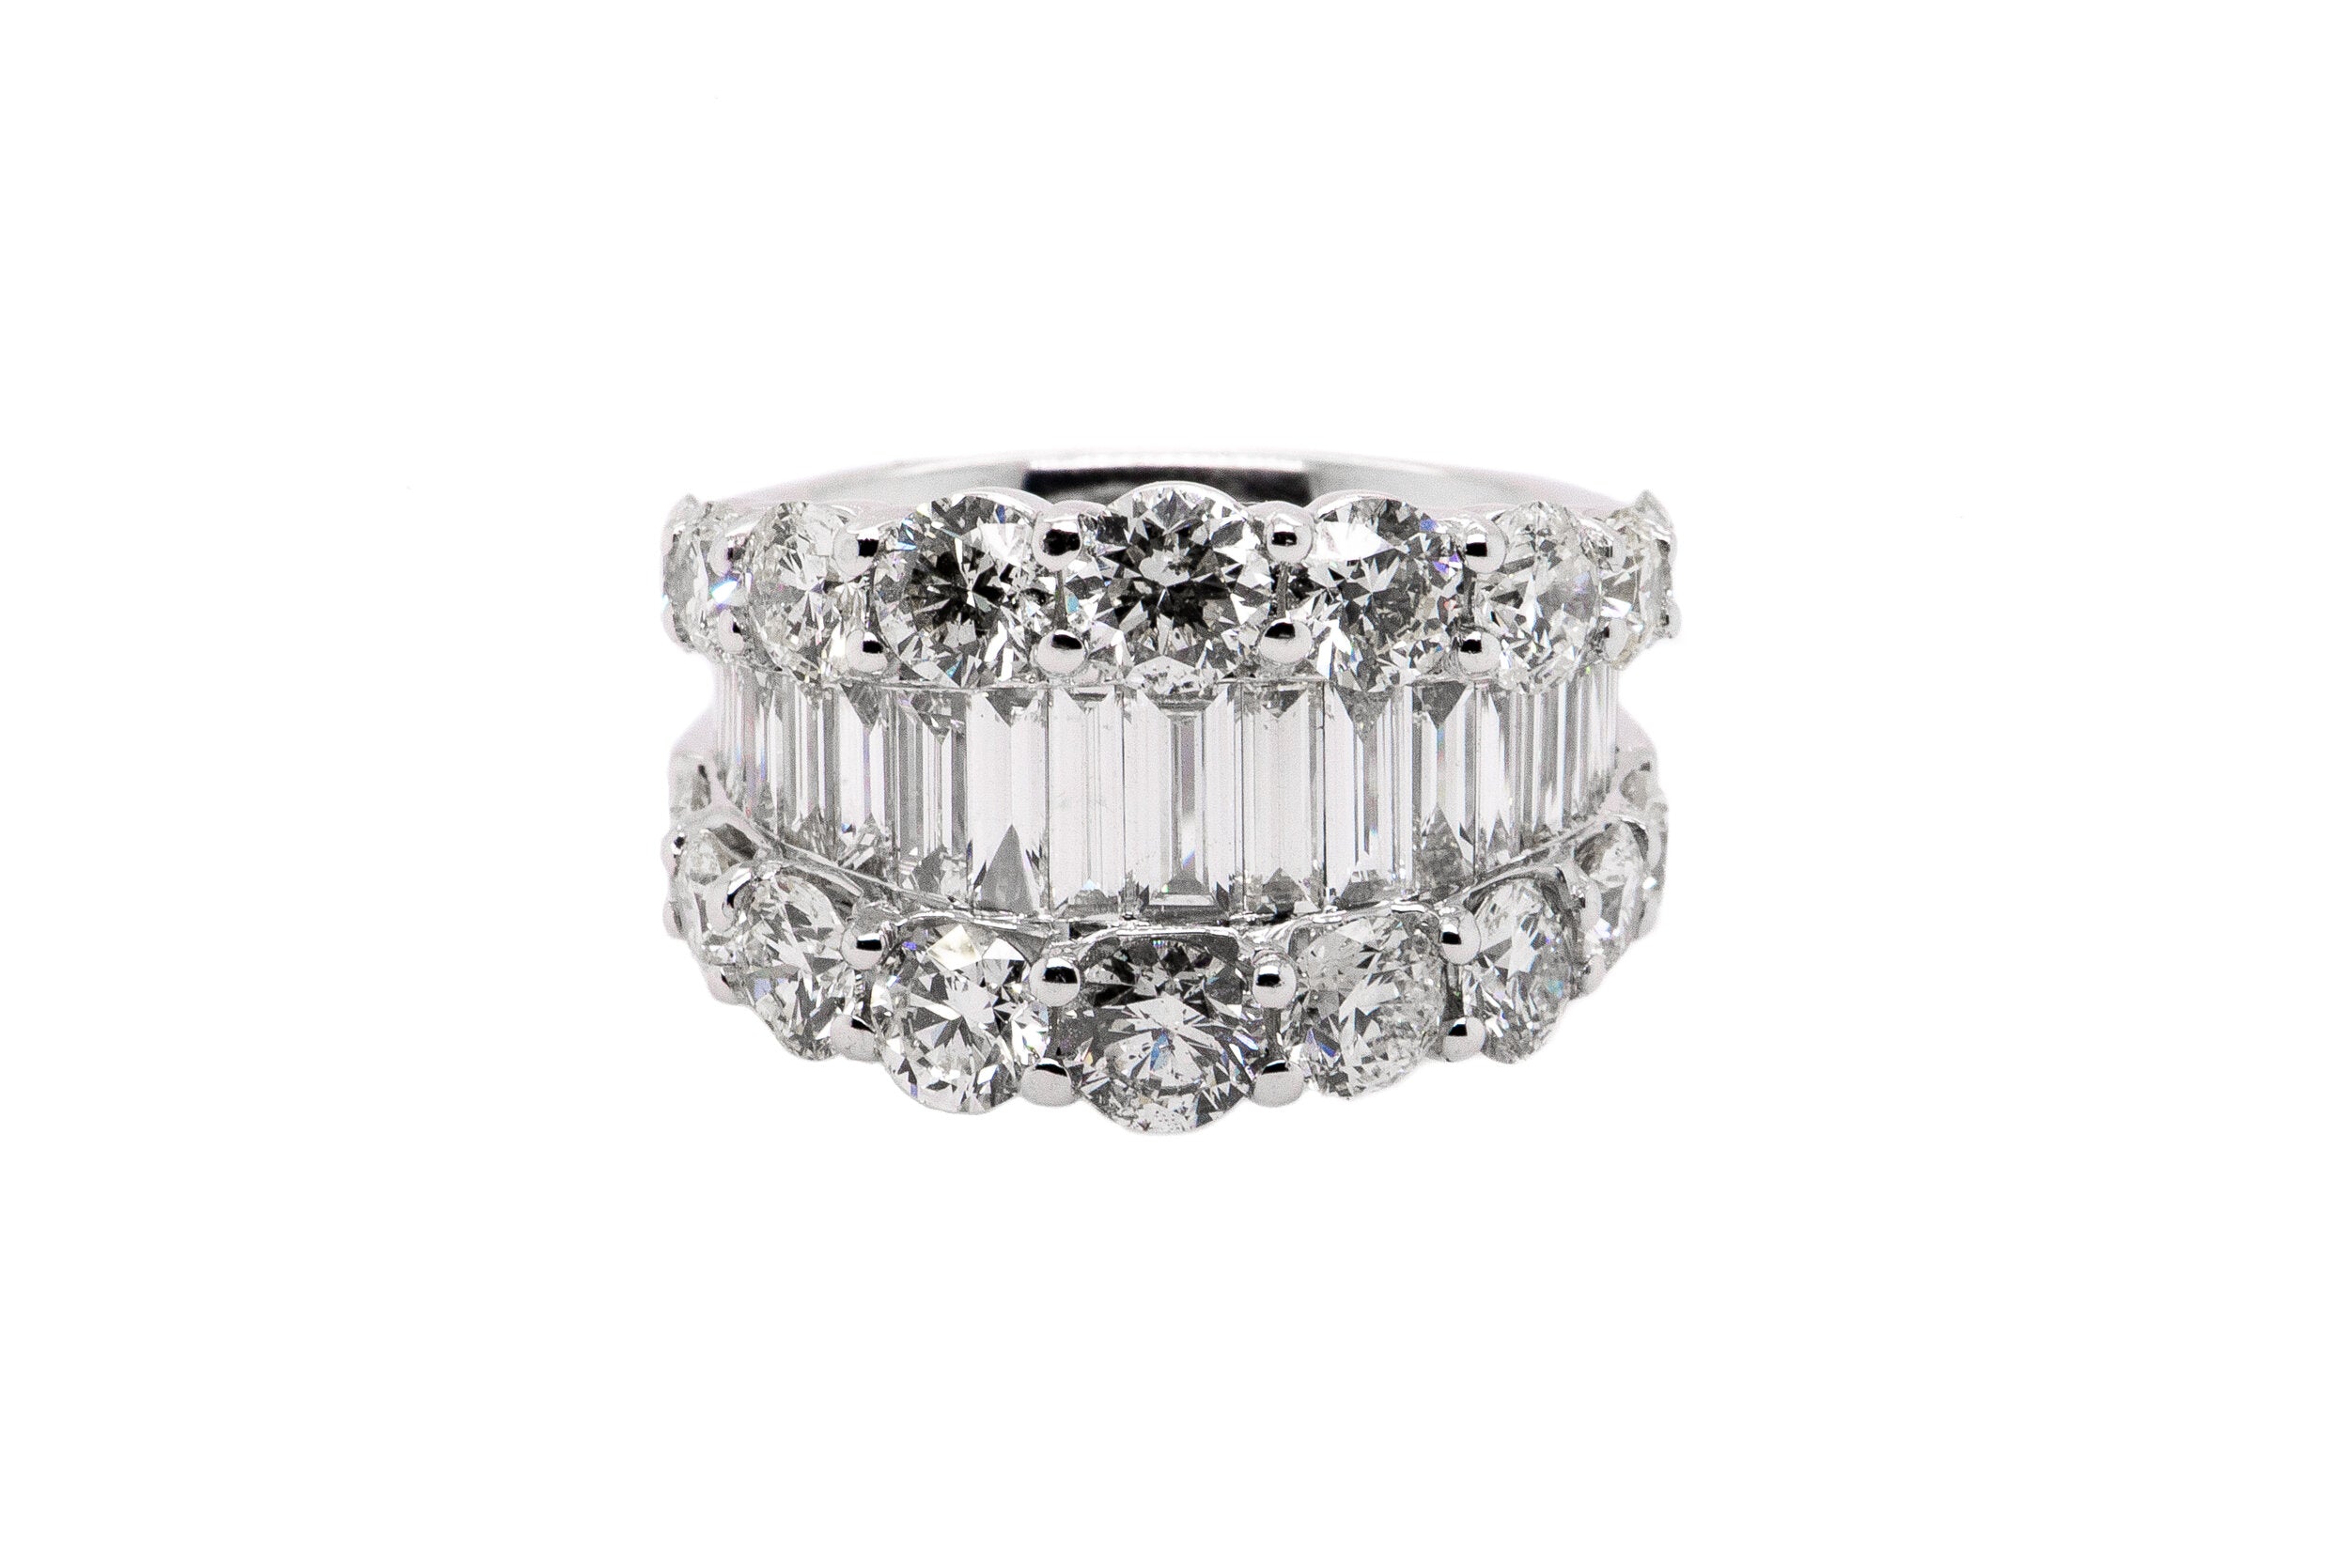 The Unique Collection: Round And Baguette Cut Diamond Ring